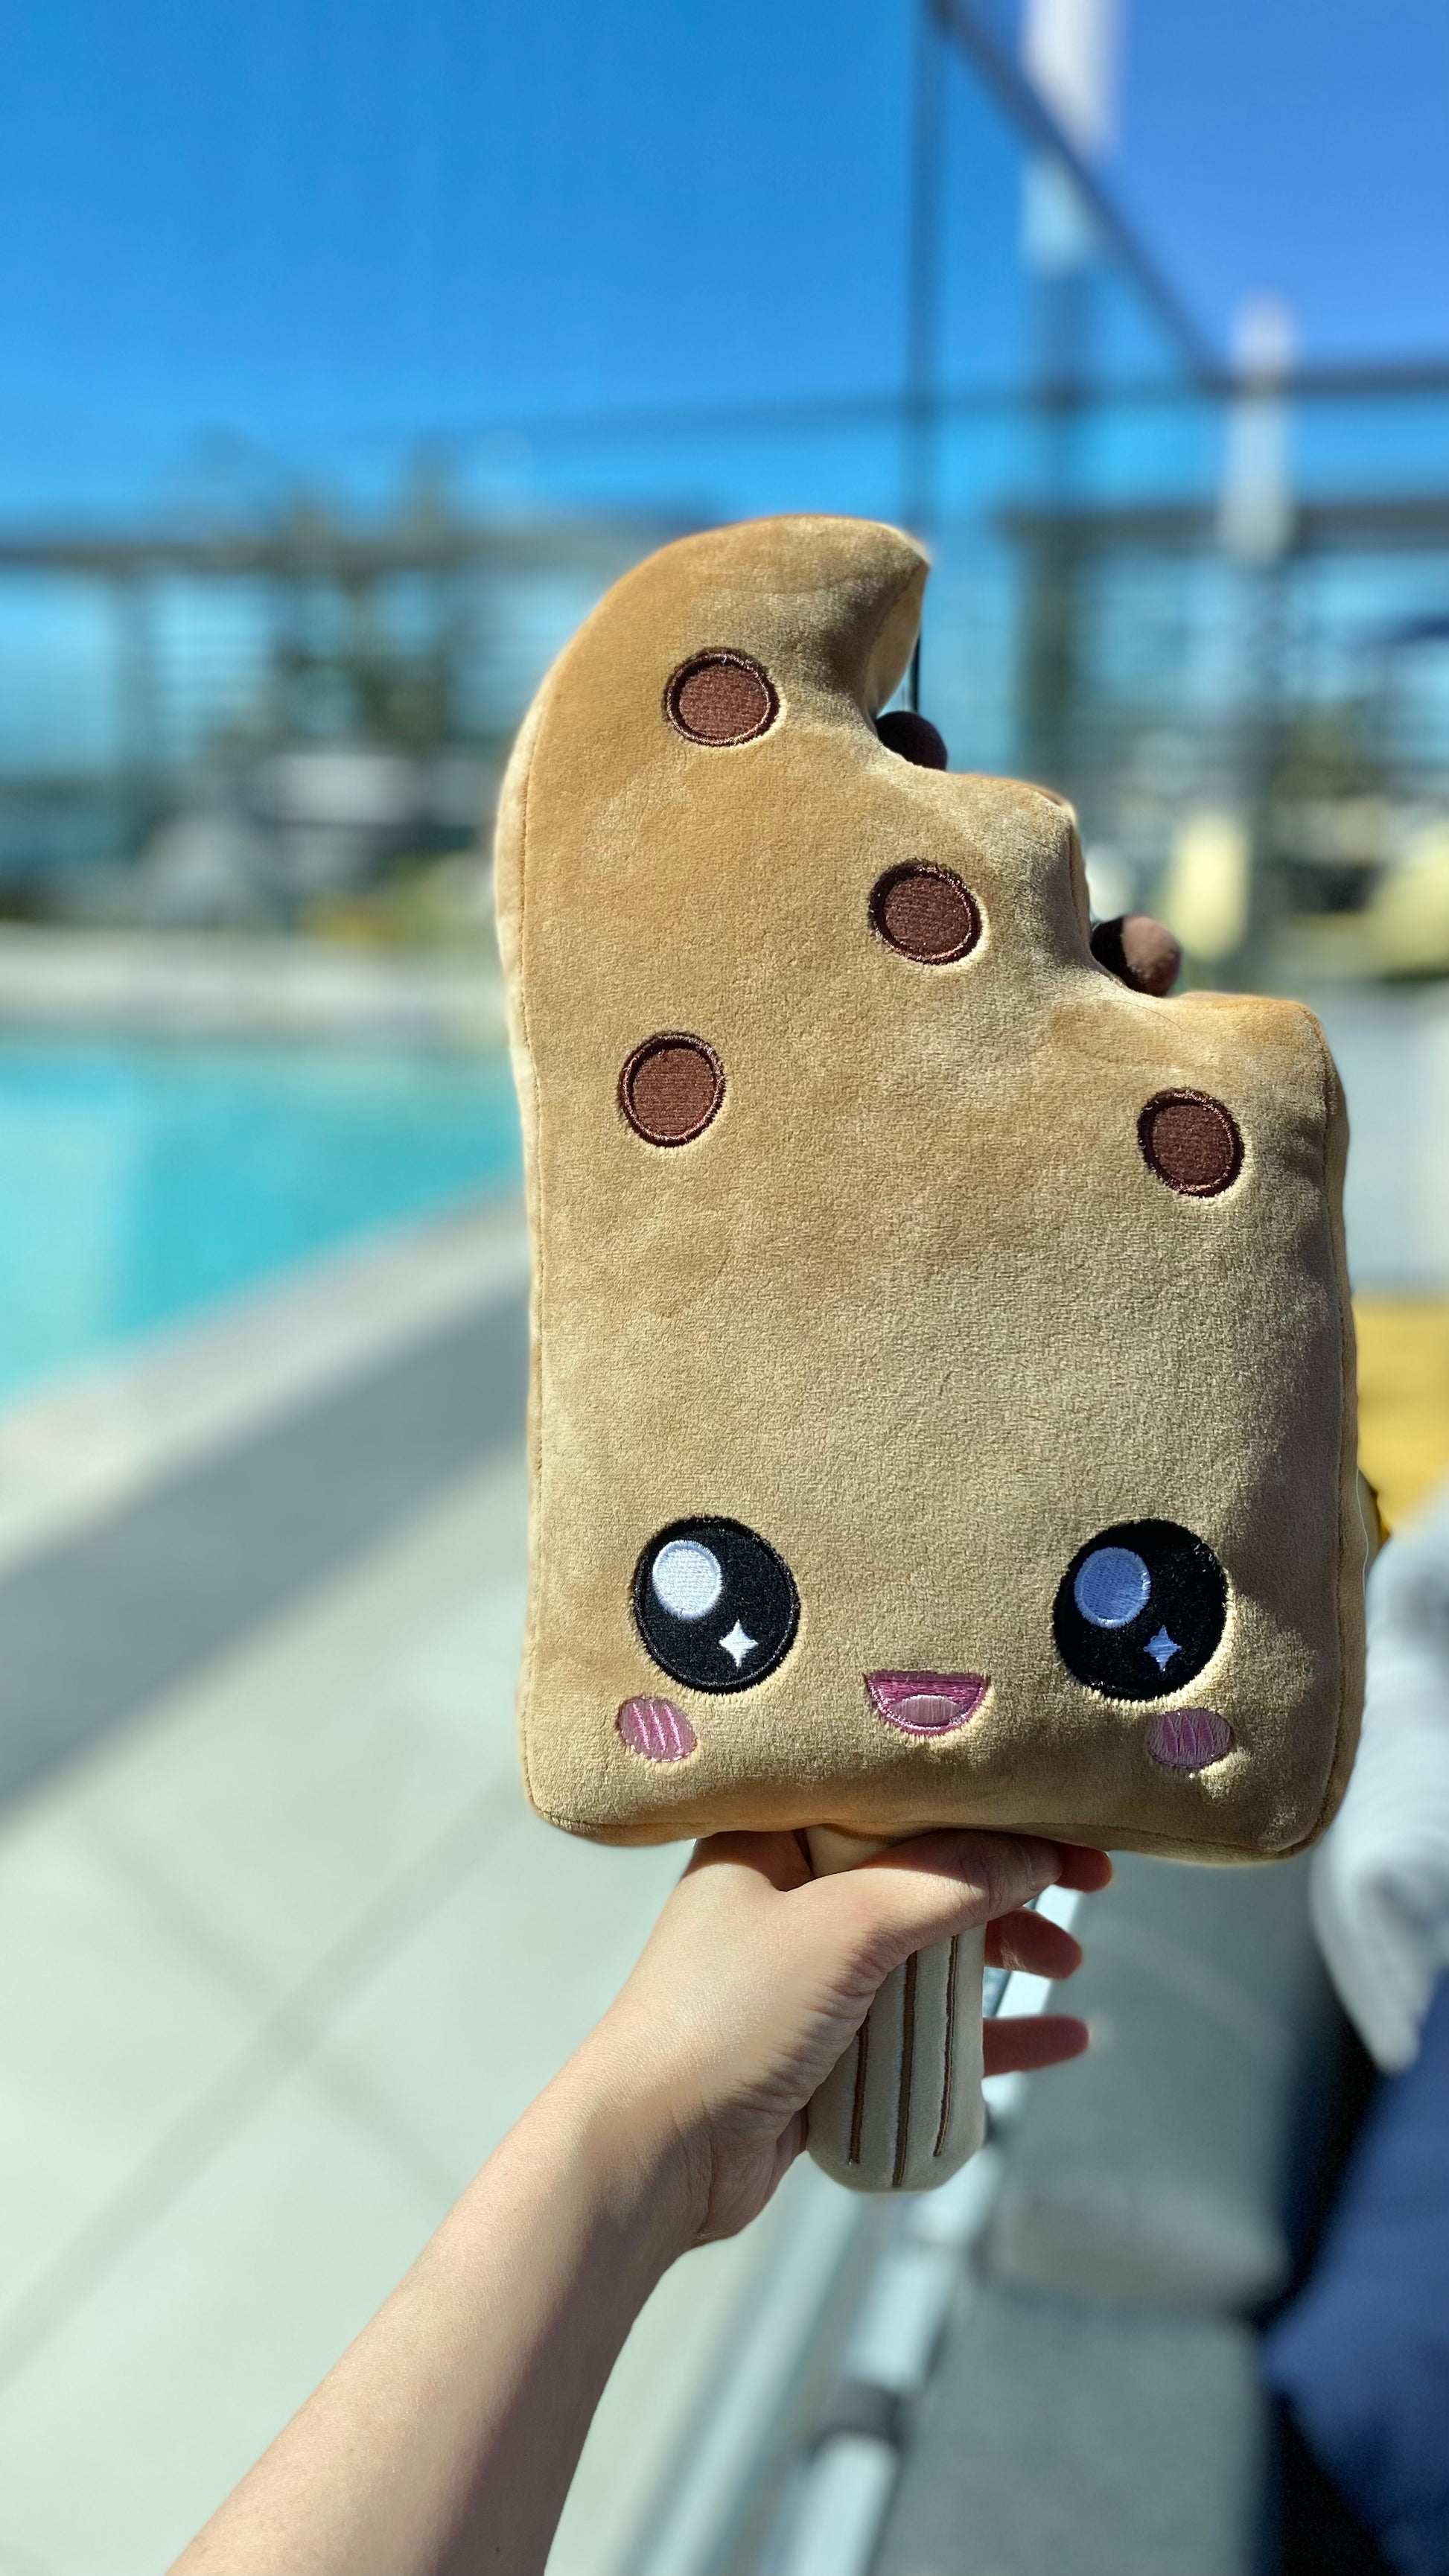 Plush toy of a boba ice cream bar with a smiling face, held by the bottom portion resembling a popsicle stick in front of a swimming pool.